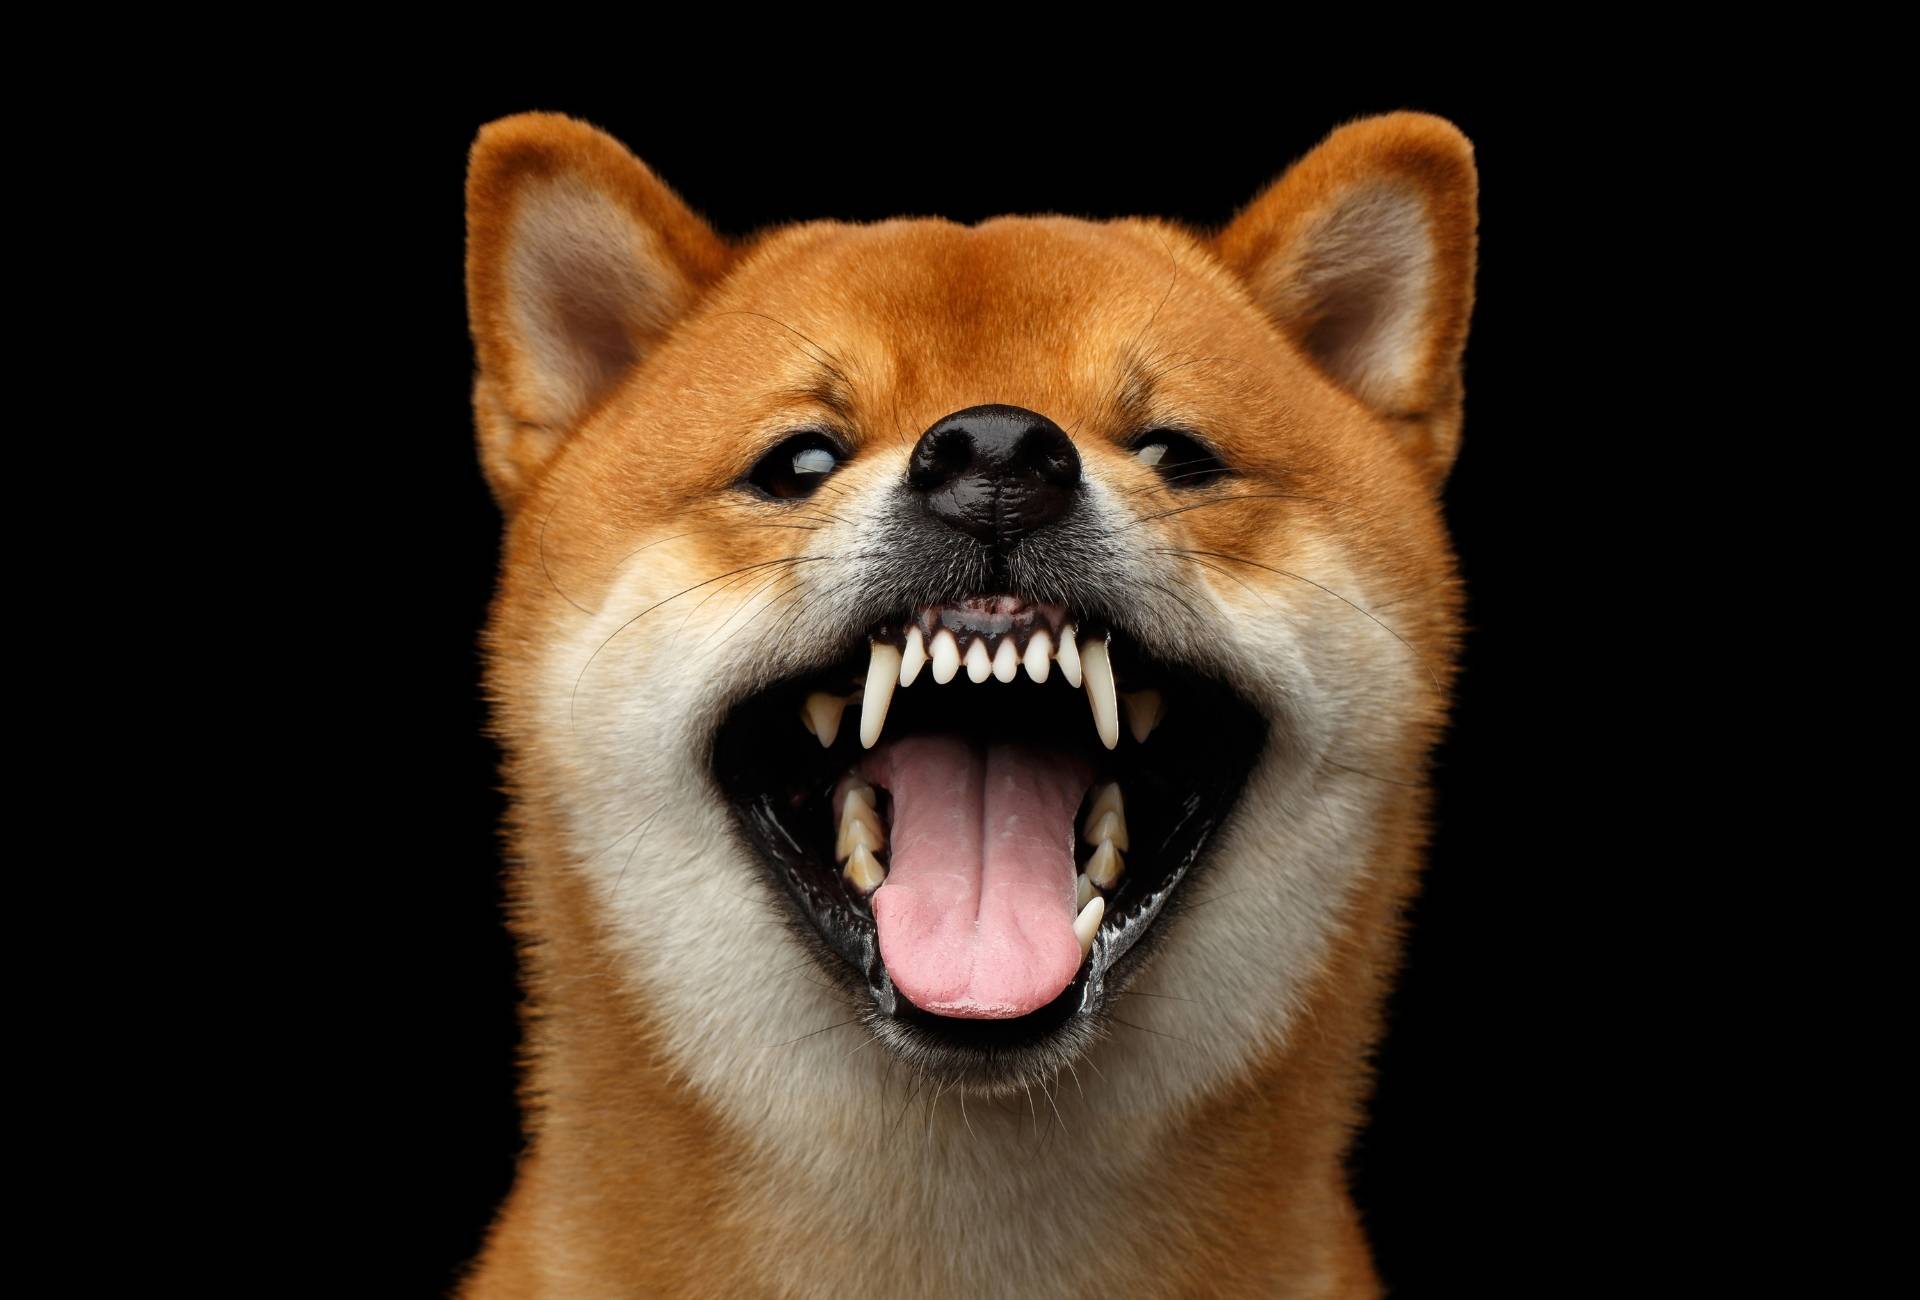 Shiba Inu has mouth wide open and looks angry in front of a black background.